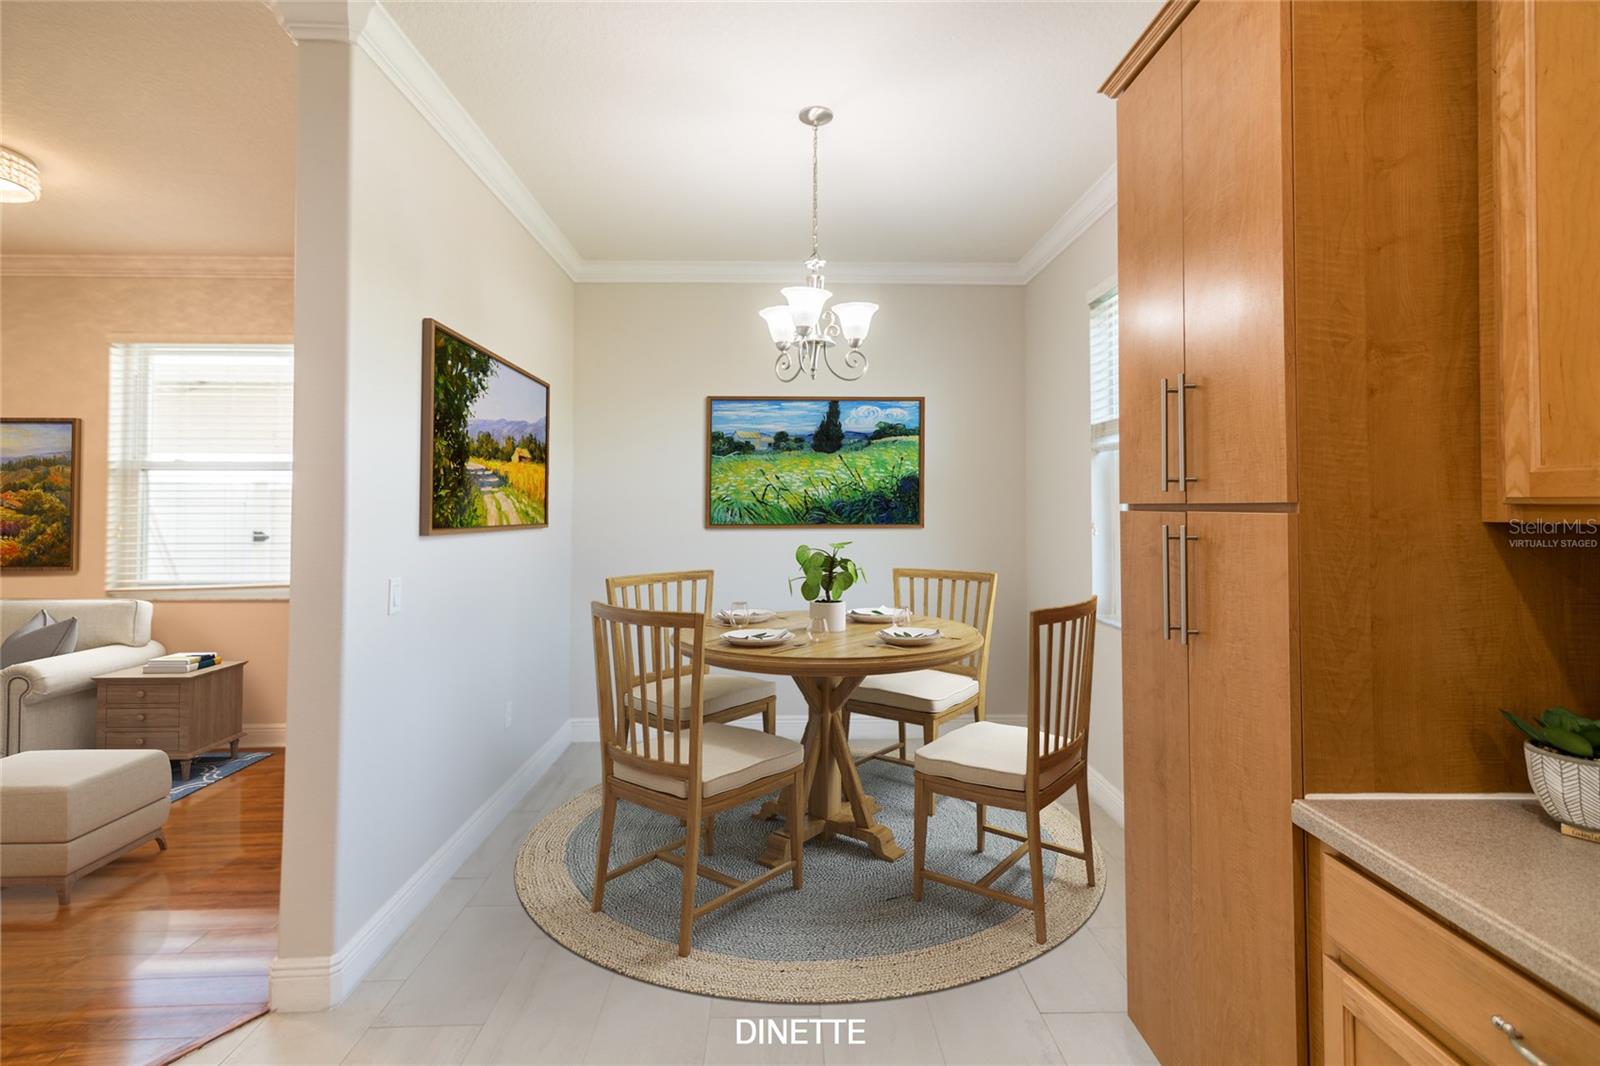 Virtually Staged Dining Area off the Kitchen